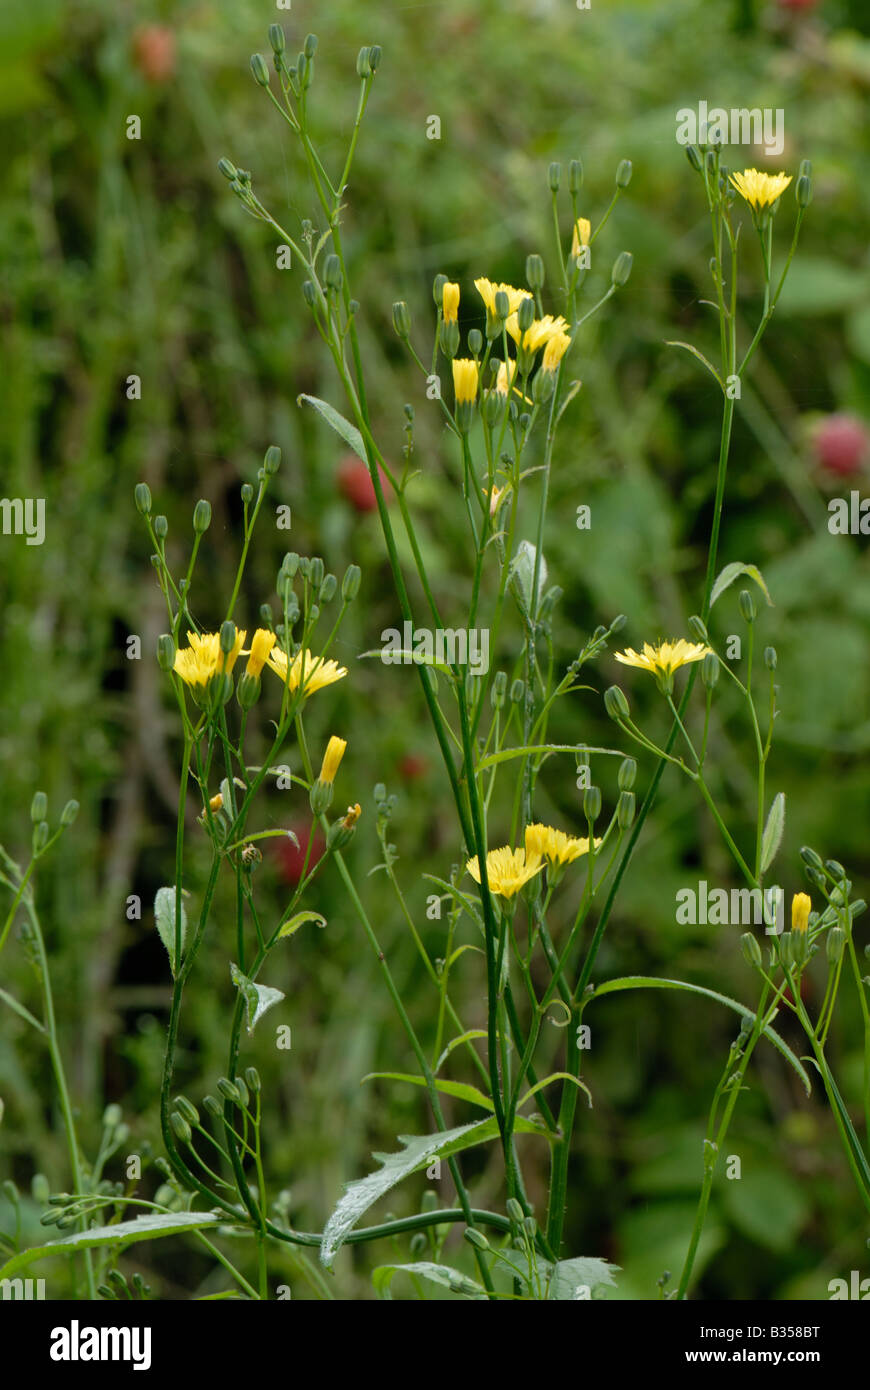 Flowers and flower buds of nipplewort Lapsana communis in a garden vegetable patch Stock Photo